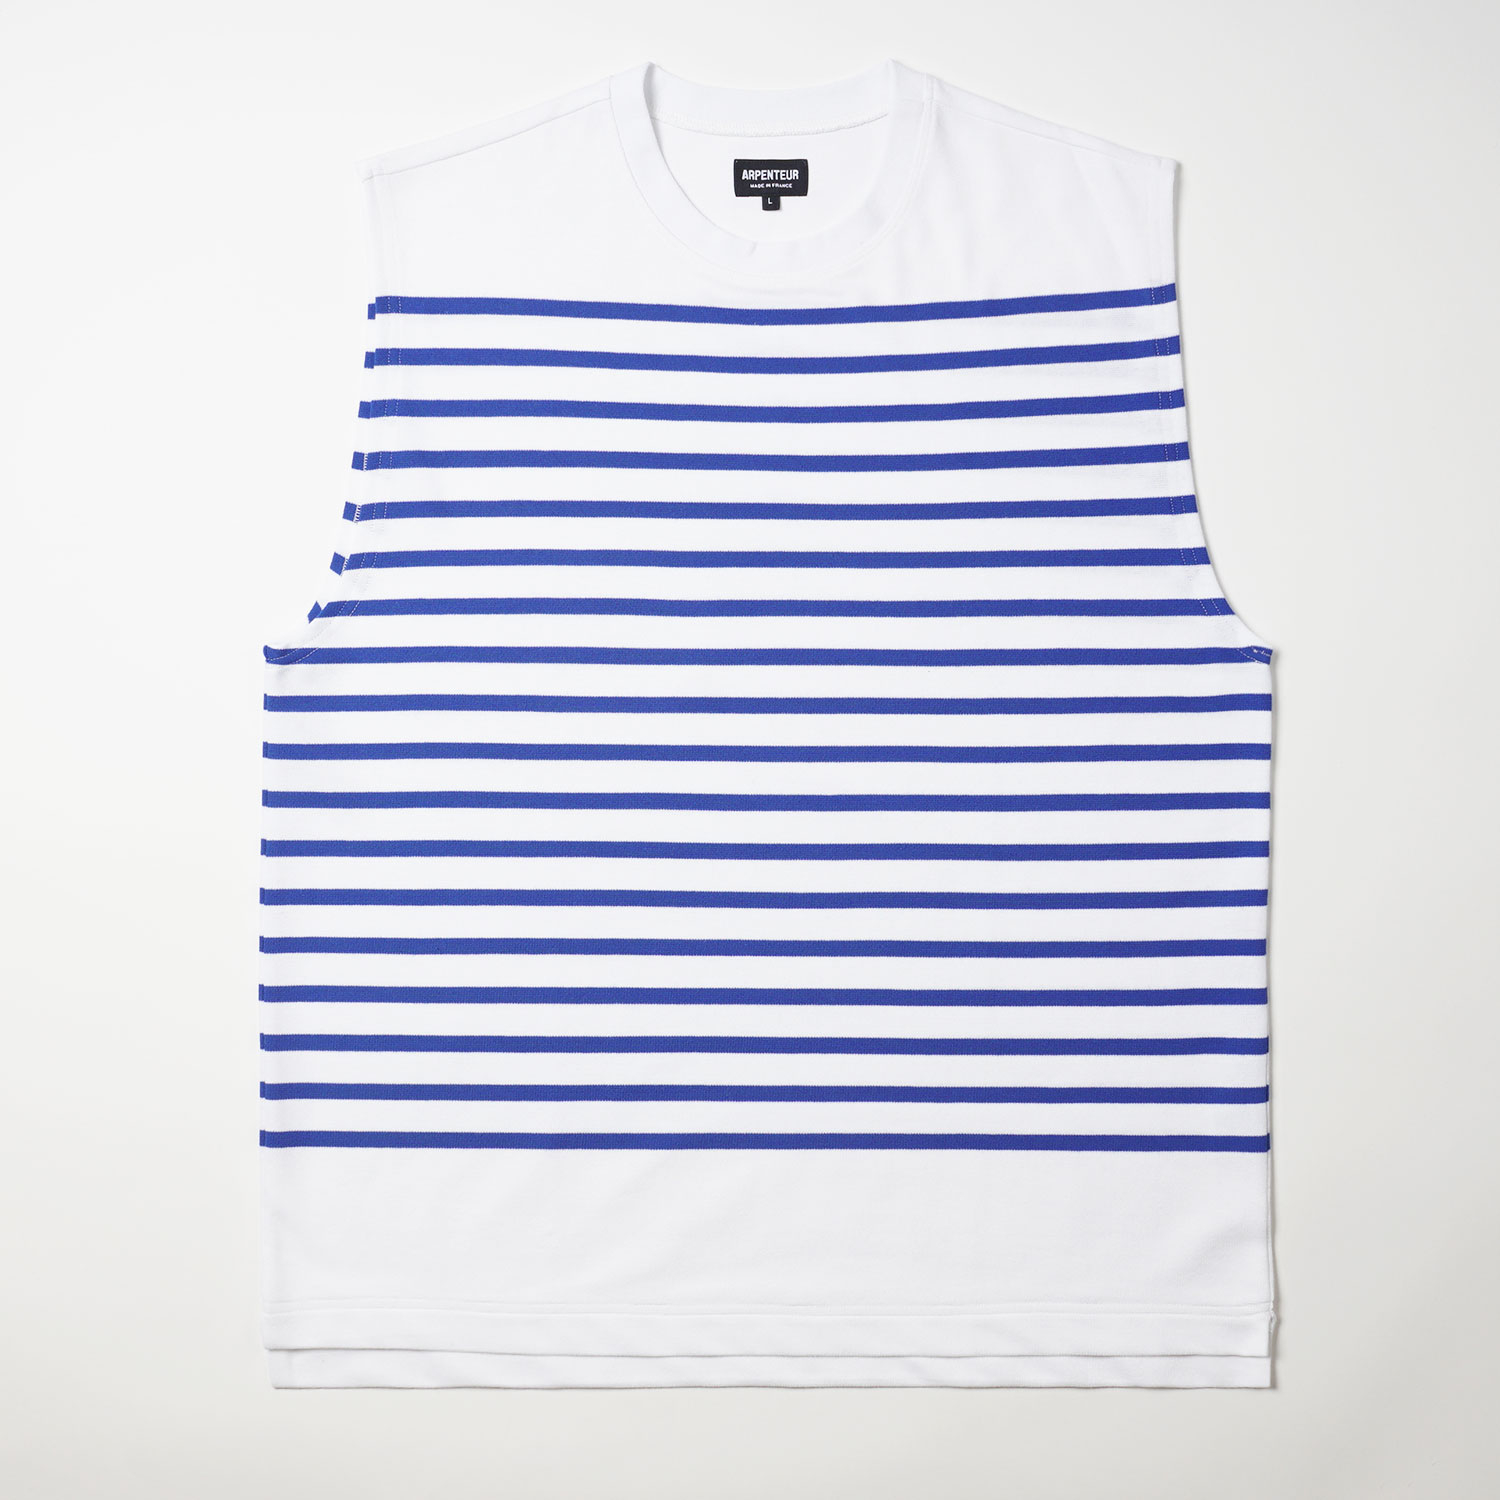 Aria t-shirt in White Royal color by Arpenteur